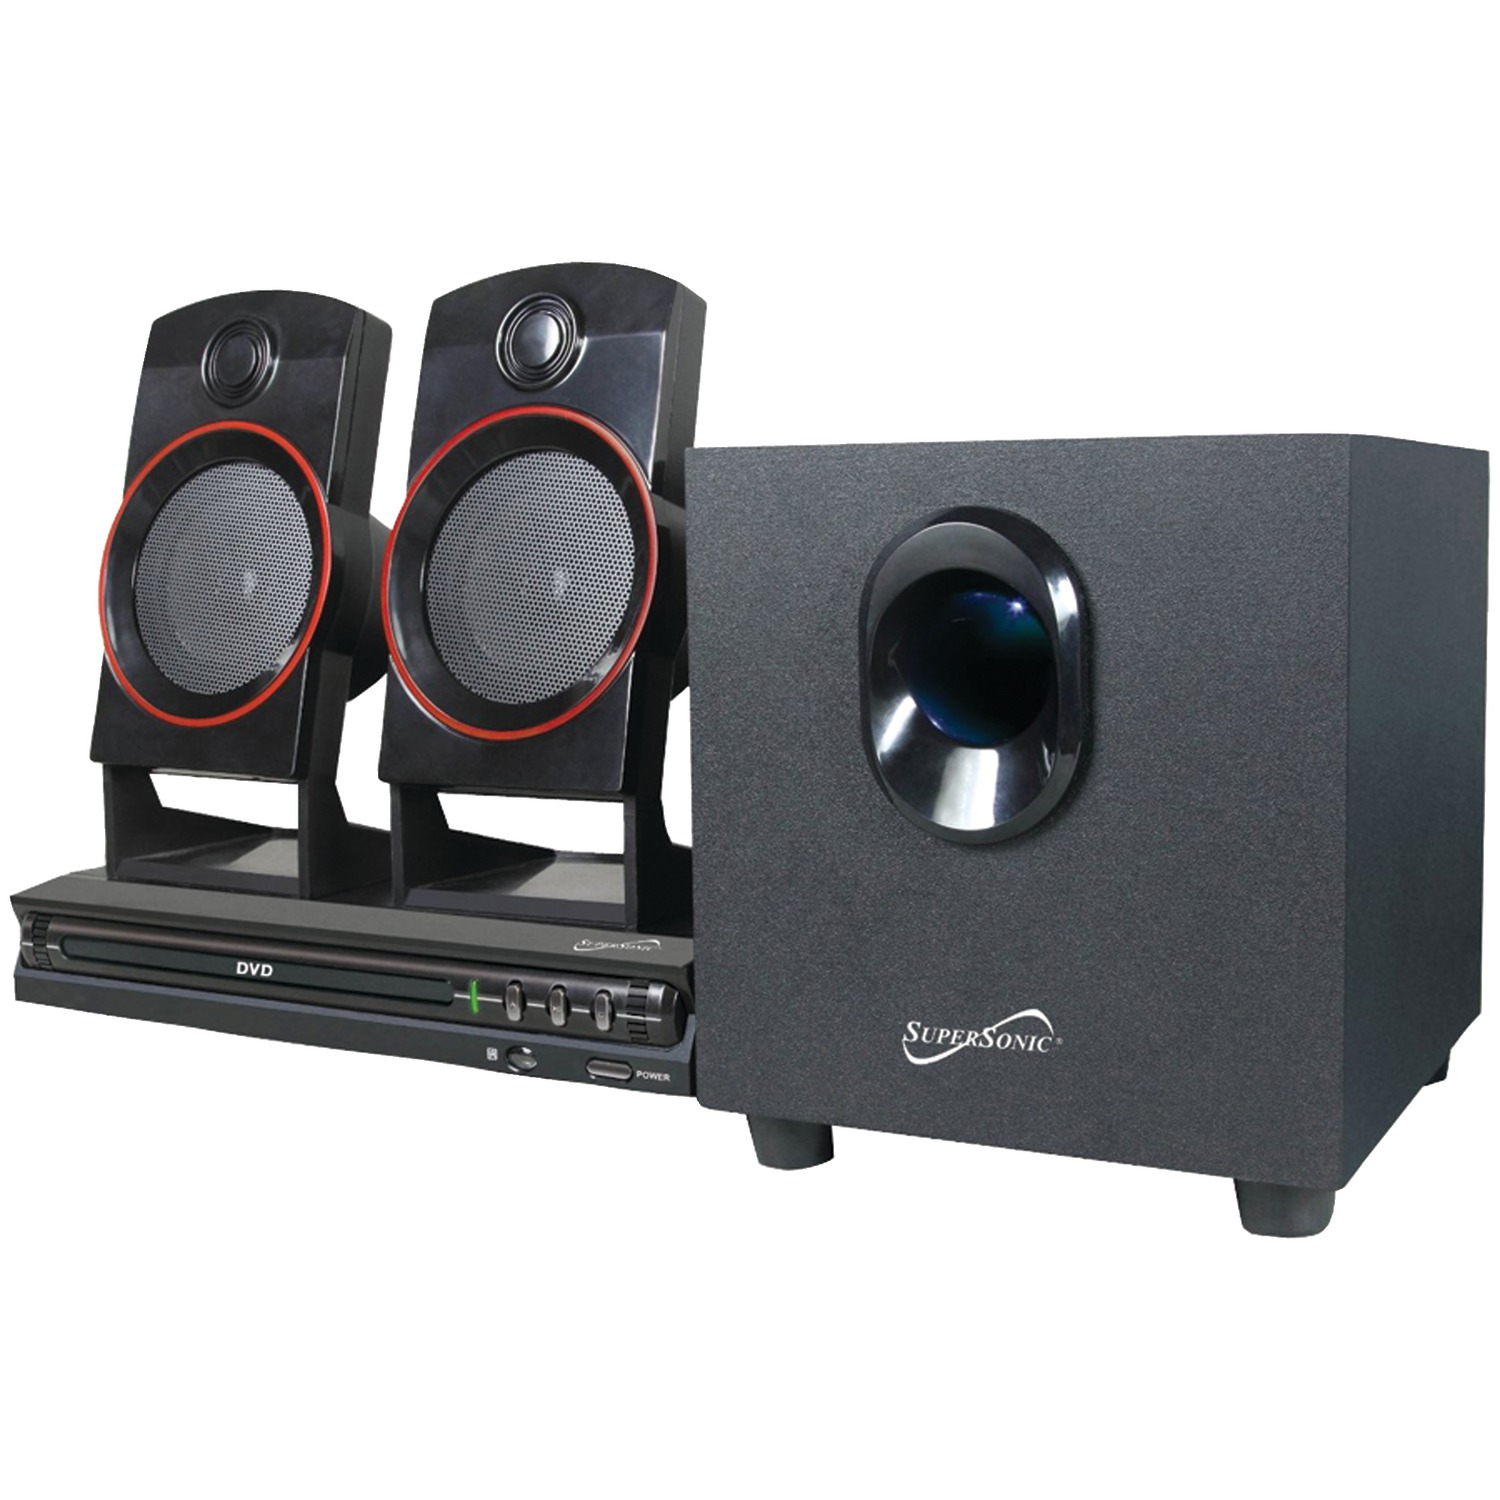 Supersonic Sc-35ht 2.1-Channel DVD Home Theater System - image 1 of 1